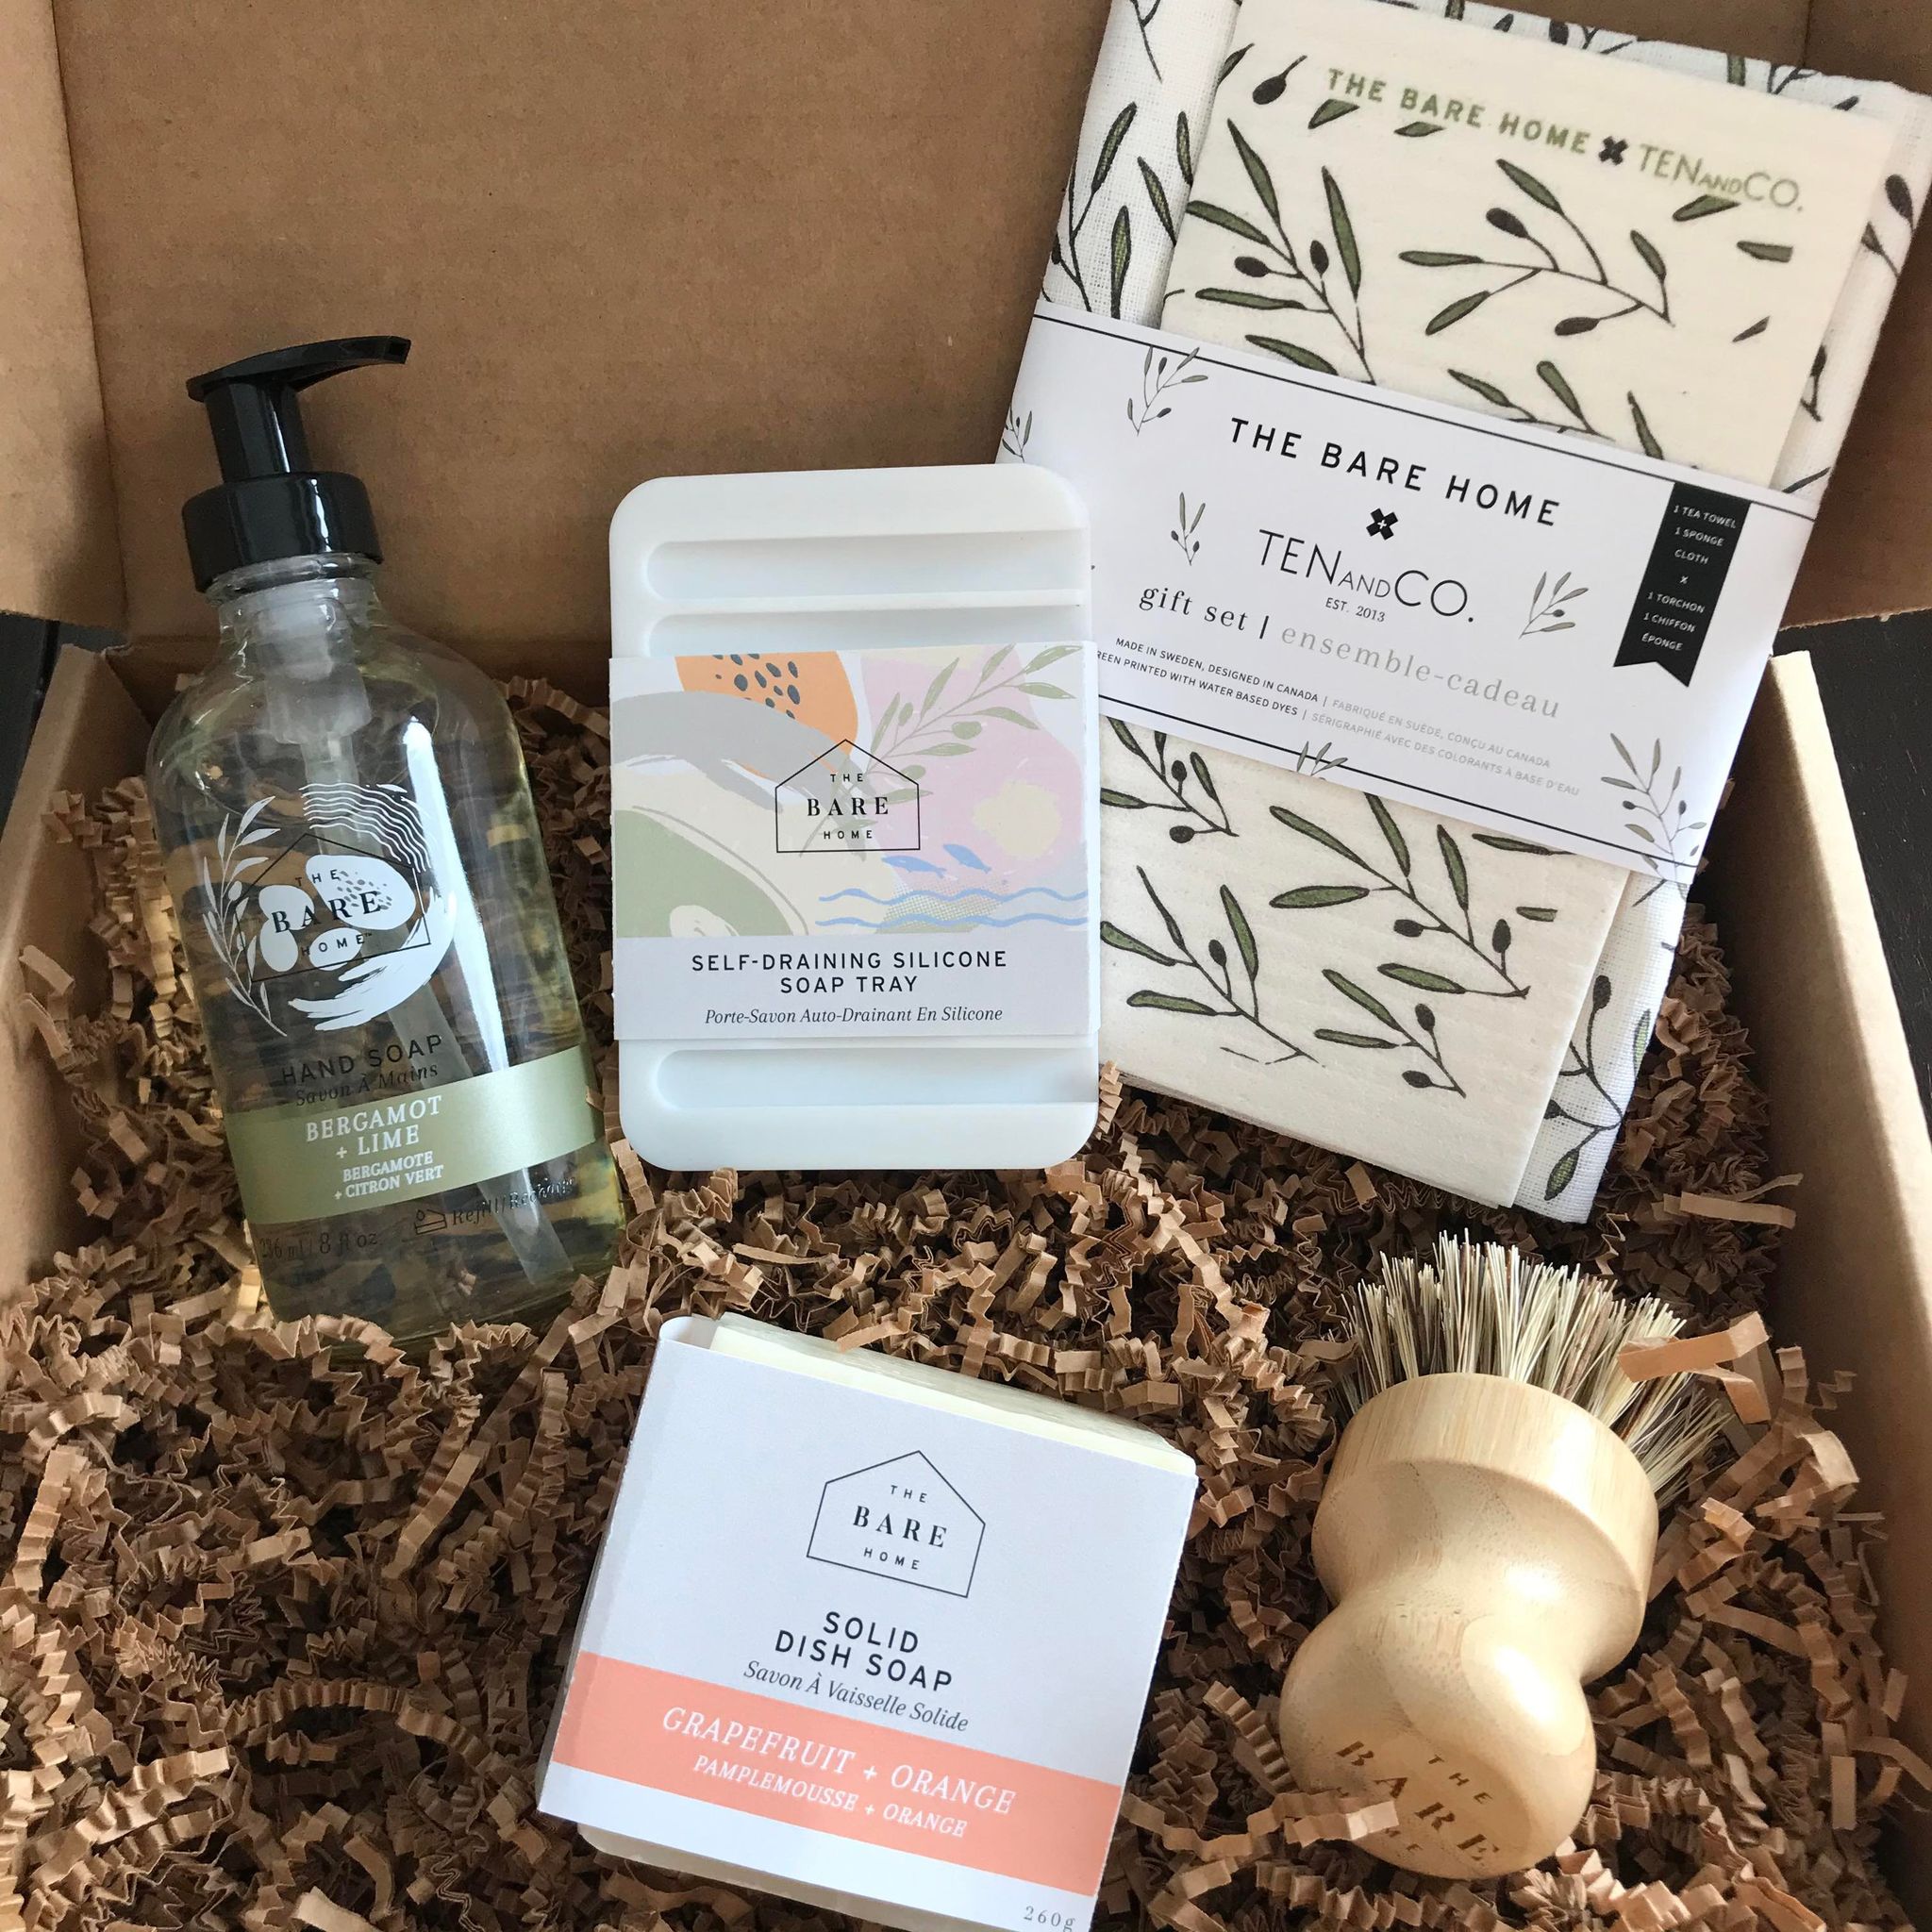 This bergamot lime kitchen scrubber gift set features a olive TEN and CO. sponge cloth and tea towel set, a refillable 236 ml bergamot lime hand soap in glass bottle, a white silicone soap dish, a grapefruit and orange dish soap bar and either a pot scrubber brush and comes in a brown kraft box